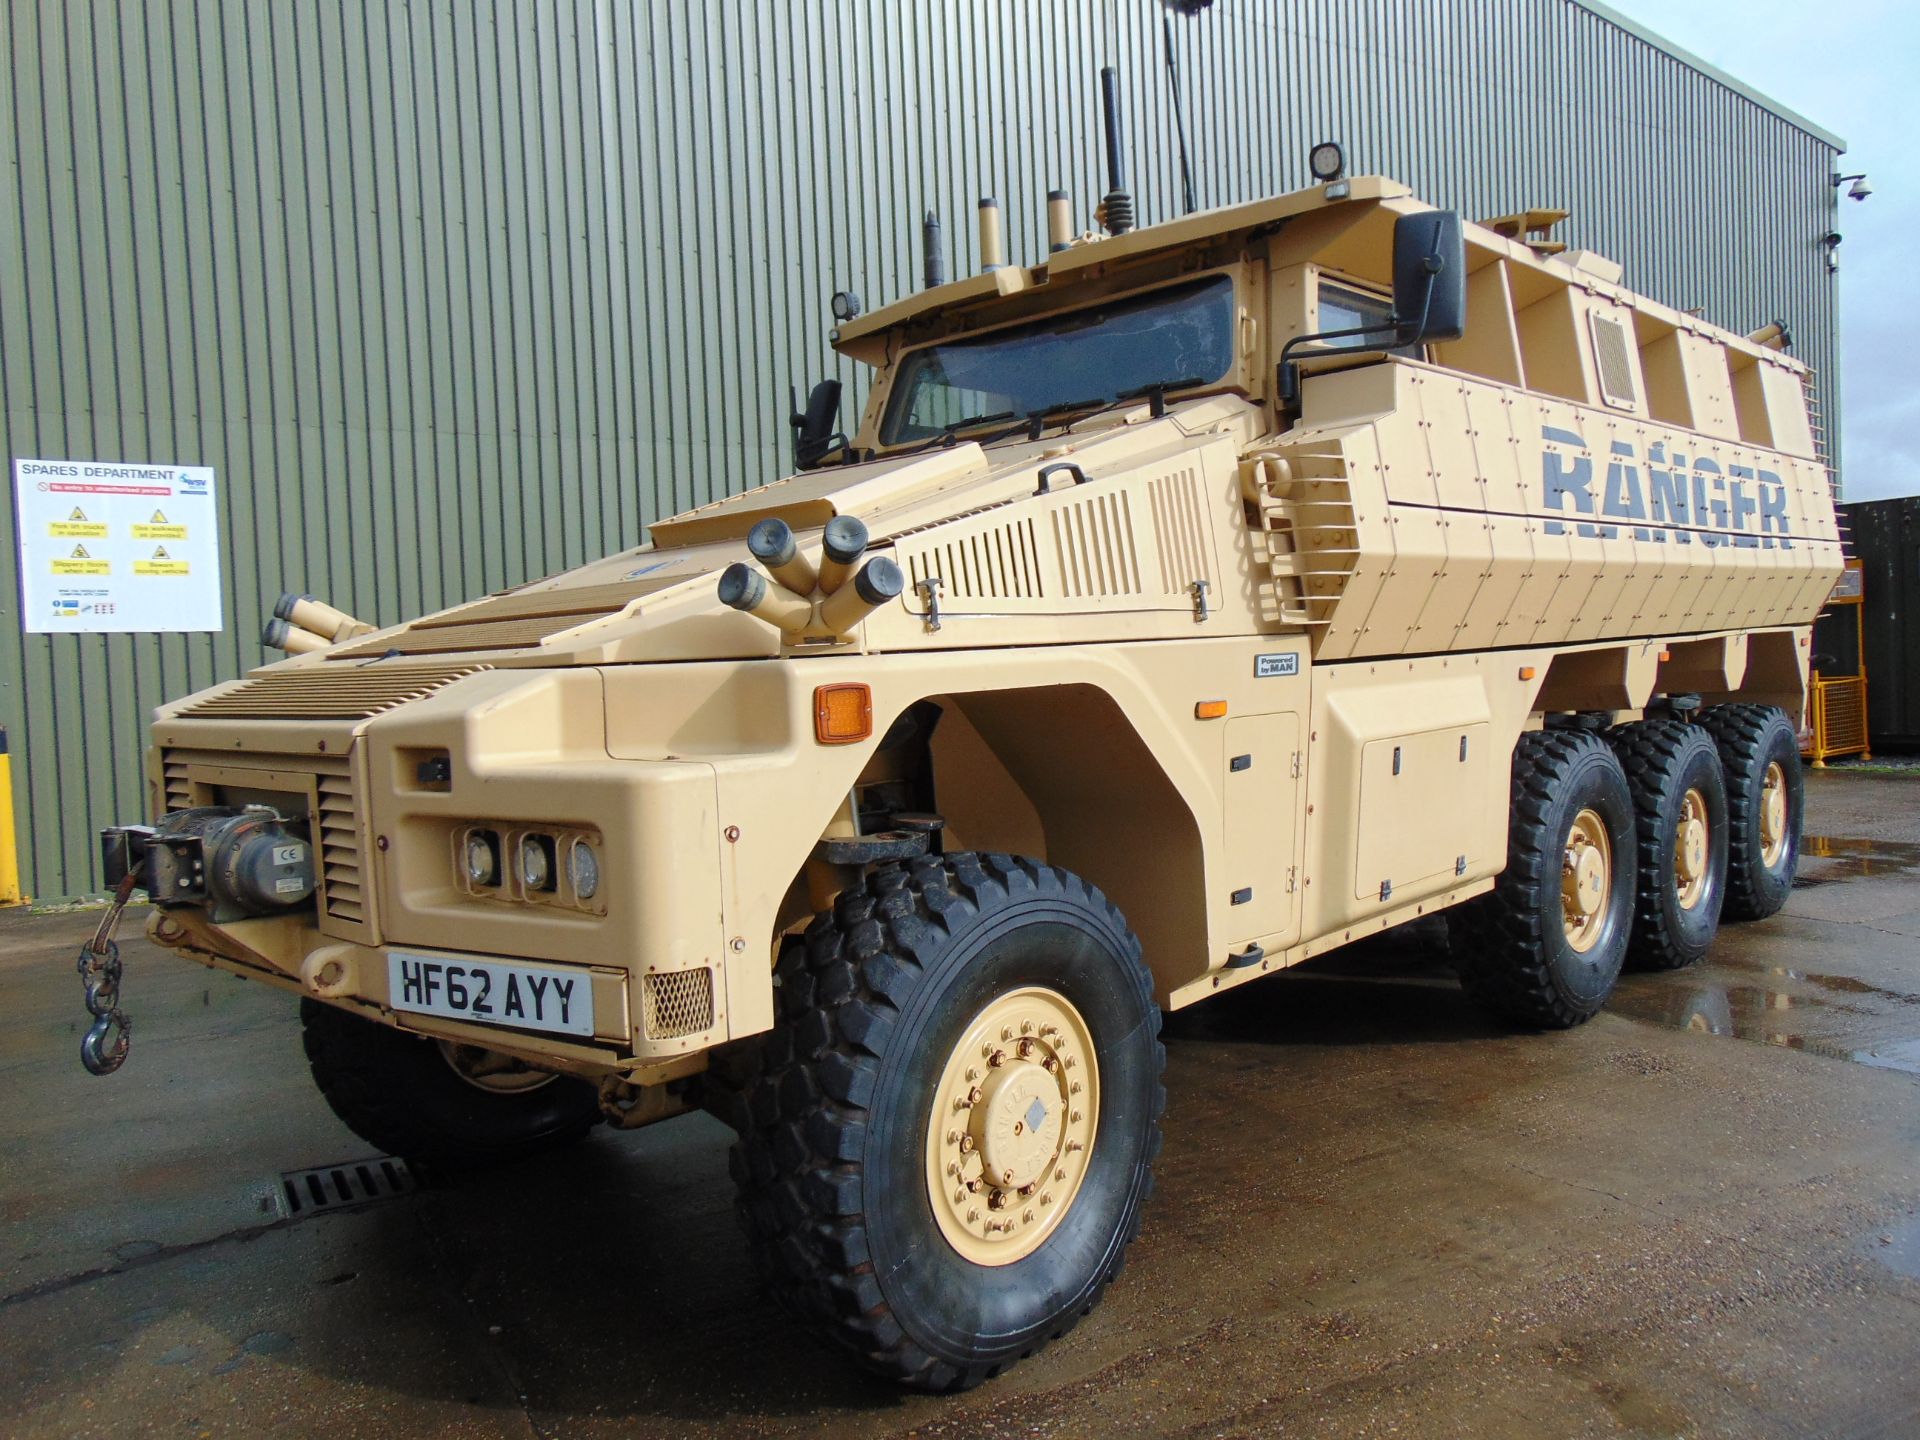 2012 RANGER 8x8 Armoured Personnel Carrier ONLY 1,354 MILES! - Image 2 of 46